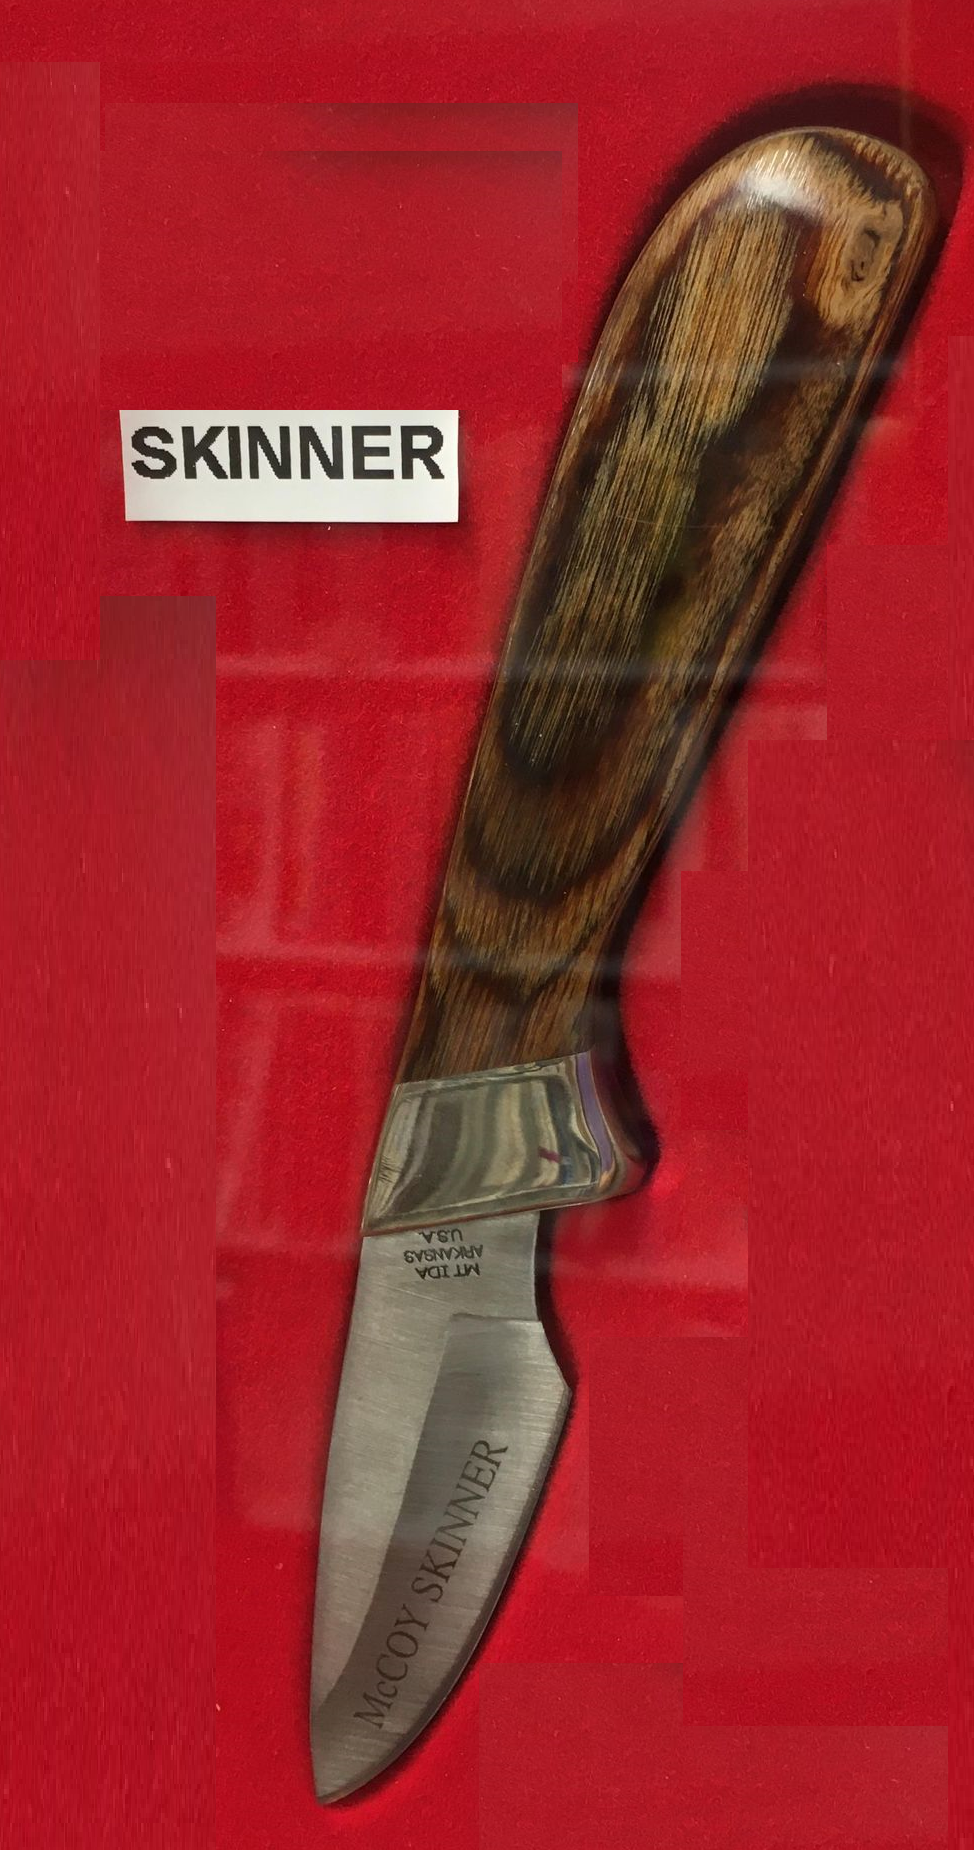 A McCoy Skinner-HW with the word skinner on its handle and a drop point blade.